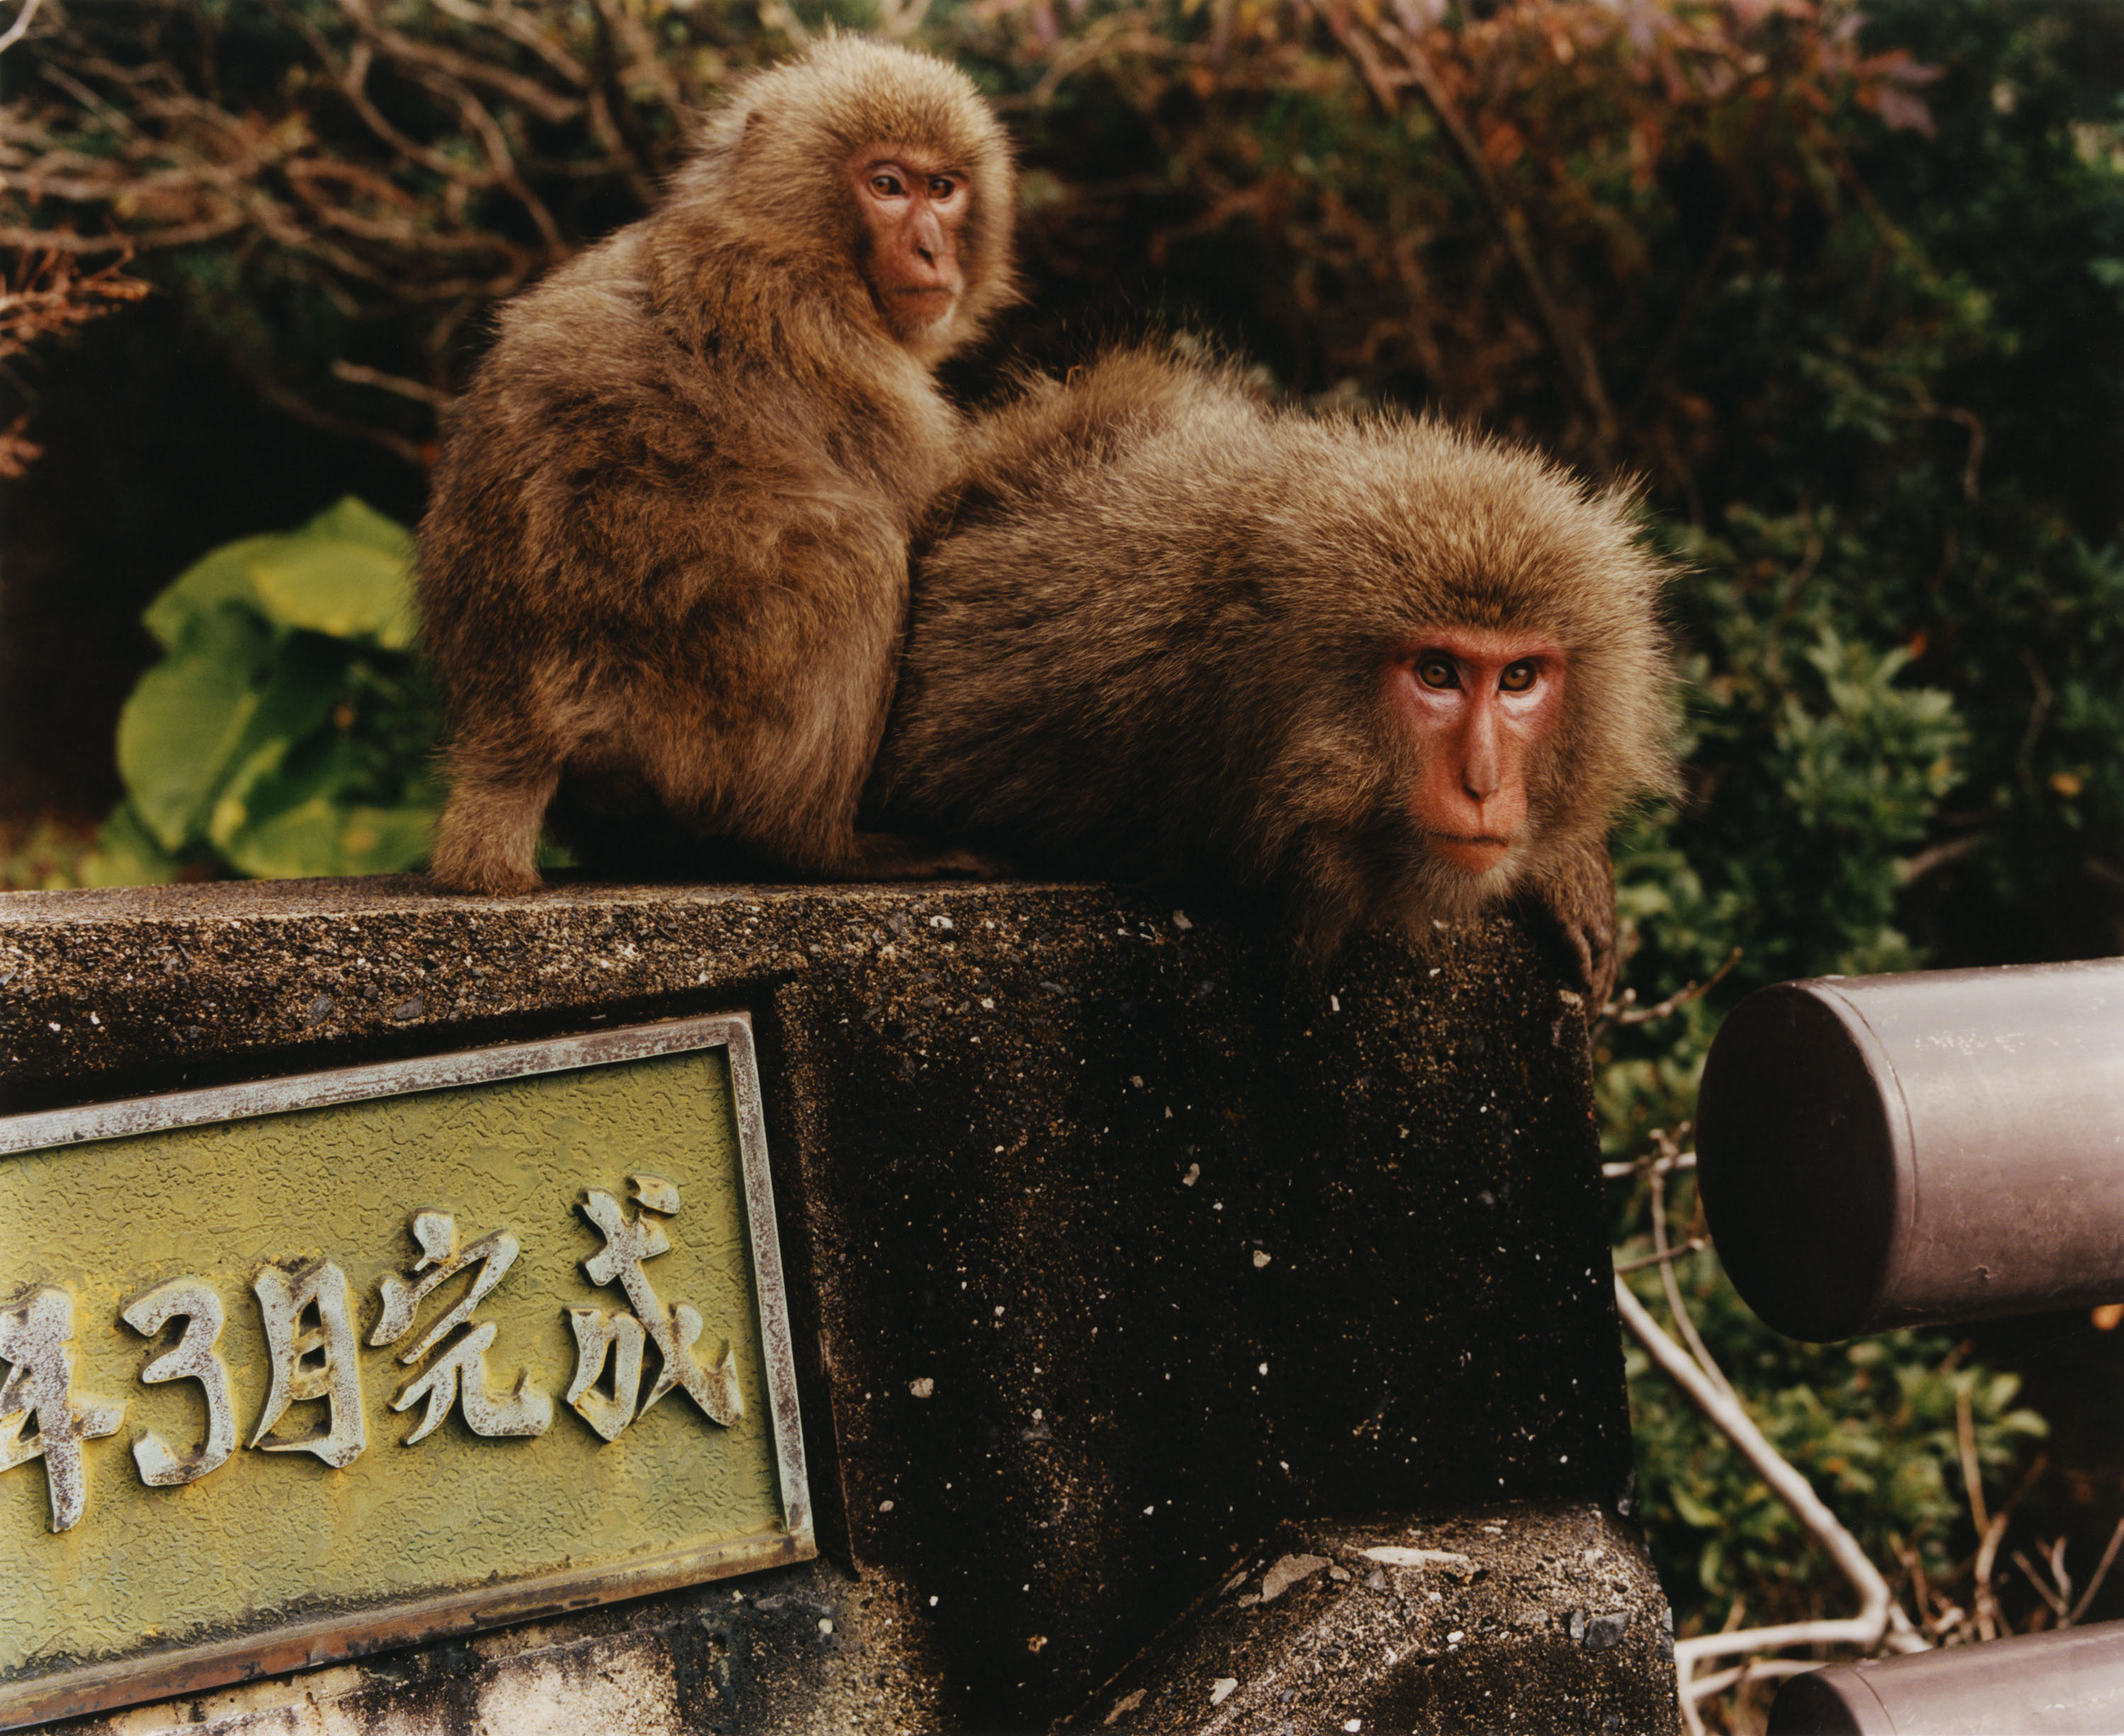 Back in January 2020, I spent two weeks in Japan following researchers and students engaged in the study of what some would call the "cultural behaviours" of Japanese macaques in three distinct regions of Japan. Their research focuses on the notion that those monkeys could transmit ritual-likes habits from one generation to another, from bathing in hot springs in the touristic park of Jigokudani, to washing sweet potatoes on the isolated island of Ko-Jima, to riding deers on the island of Yakushima. *{Article written by Ben Crair. Photo assistant : Emil Kosuge}* - © Maciek Pożoga